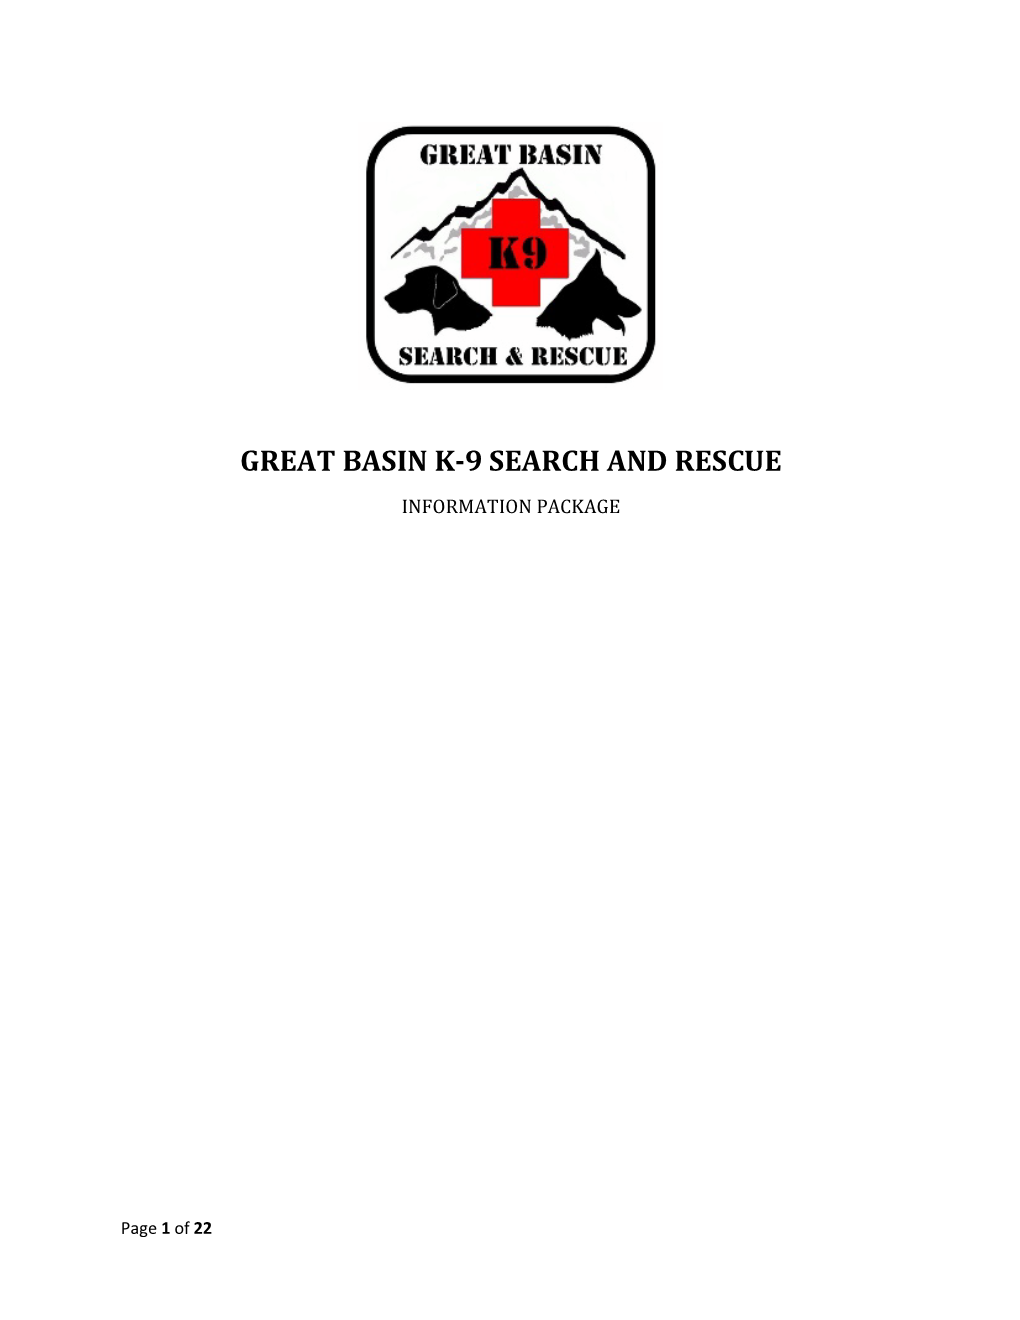 Great Basin K-9 Search and Rescue